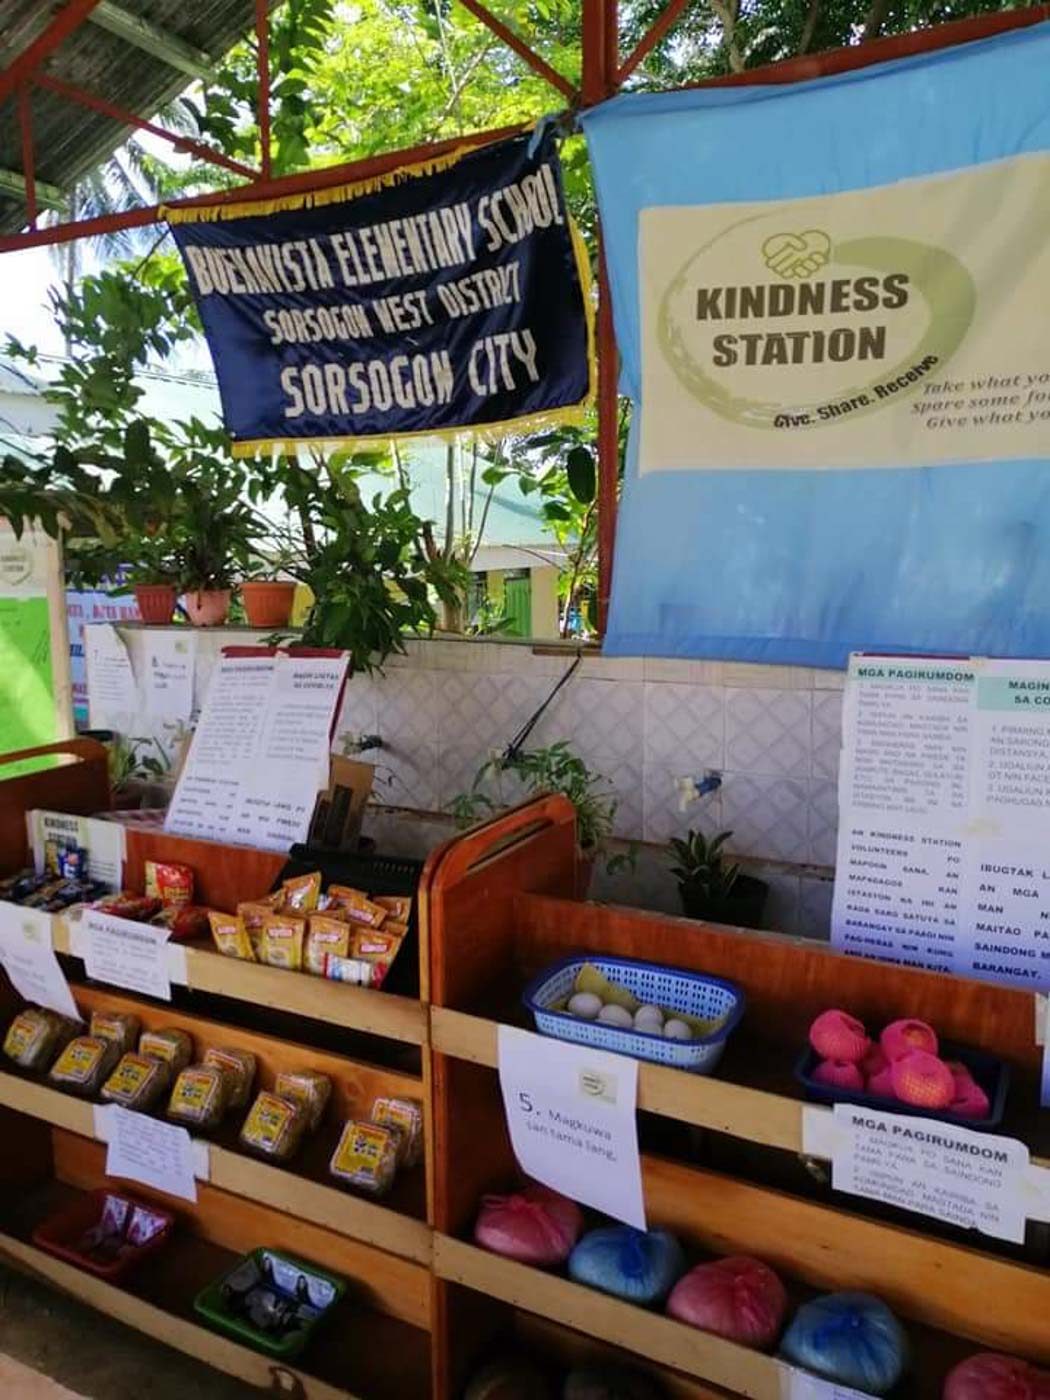 ONE OF A KIND. 'Kindness Station' promotes the value of looking after each other at a time of crisis. Photo courtesy of Kindness Station Facebook page 